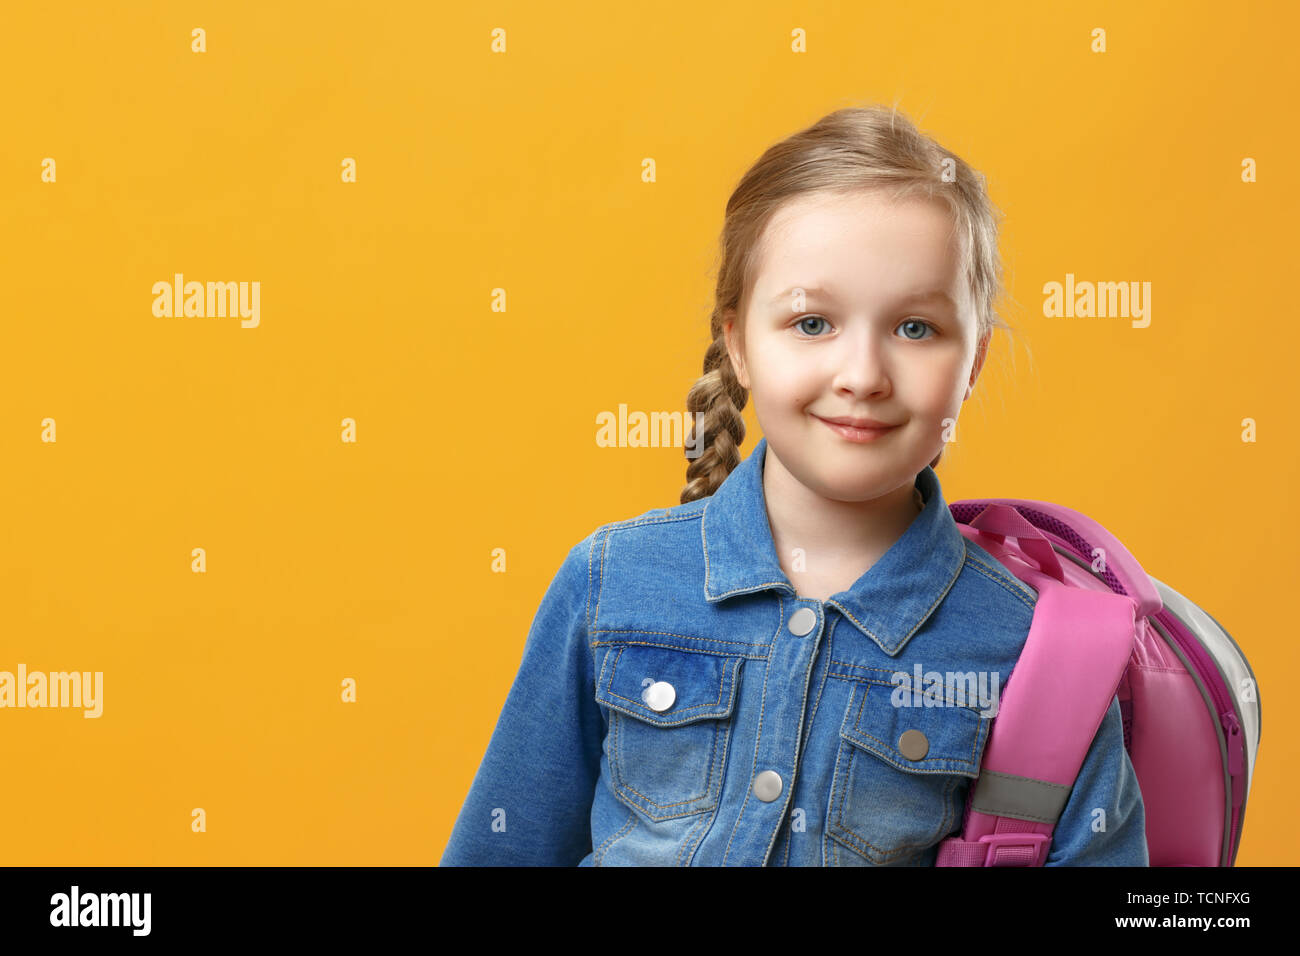 Portrait of a little girl schoolgirl with a backpack on a yellow background. Back to school. The concept of education. Copy space. Stock Photo